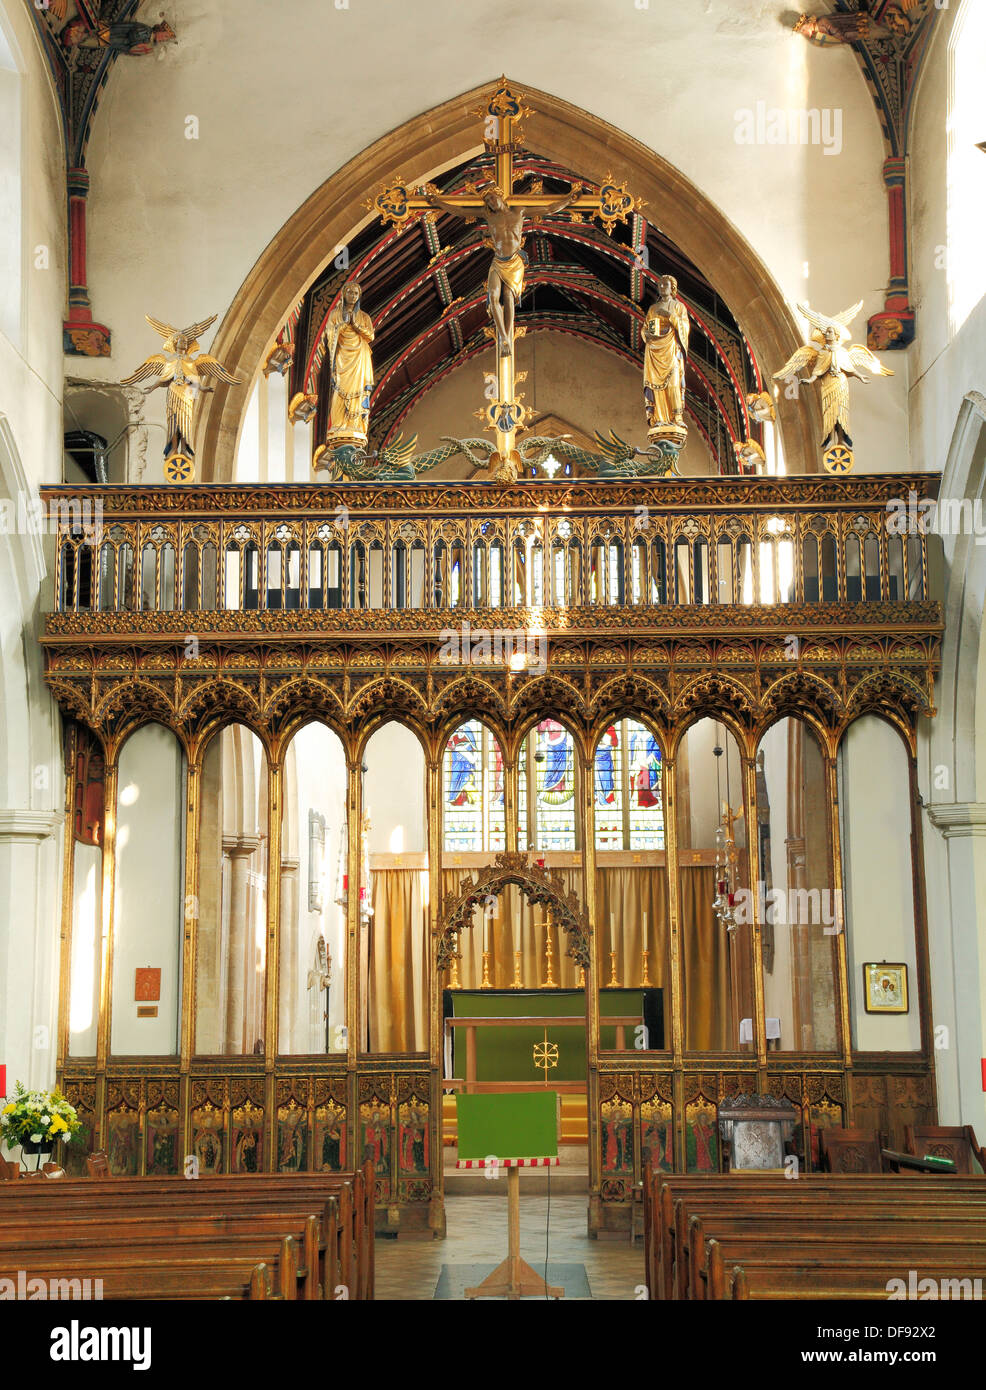 Eye, Suffolk, medieval rood screen, vaulting and loft, partially rebuilt by Sir Ninian Comper 1925, England UK interior church Stock Photo